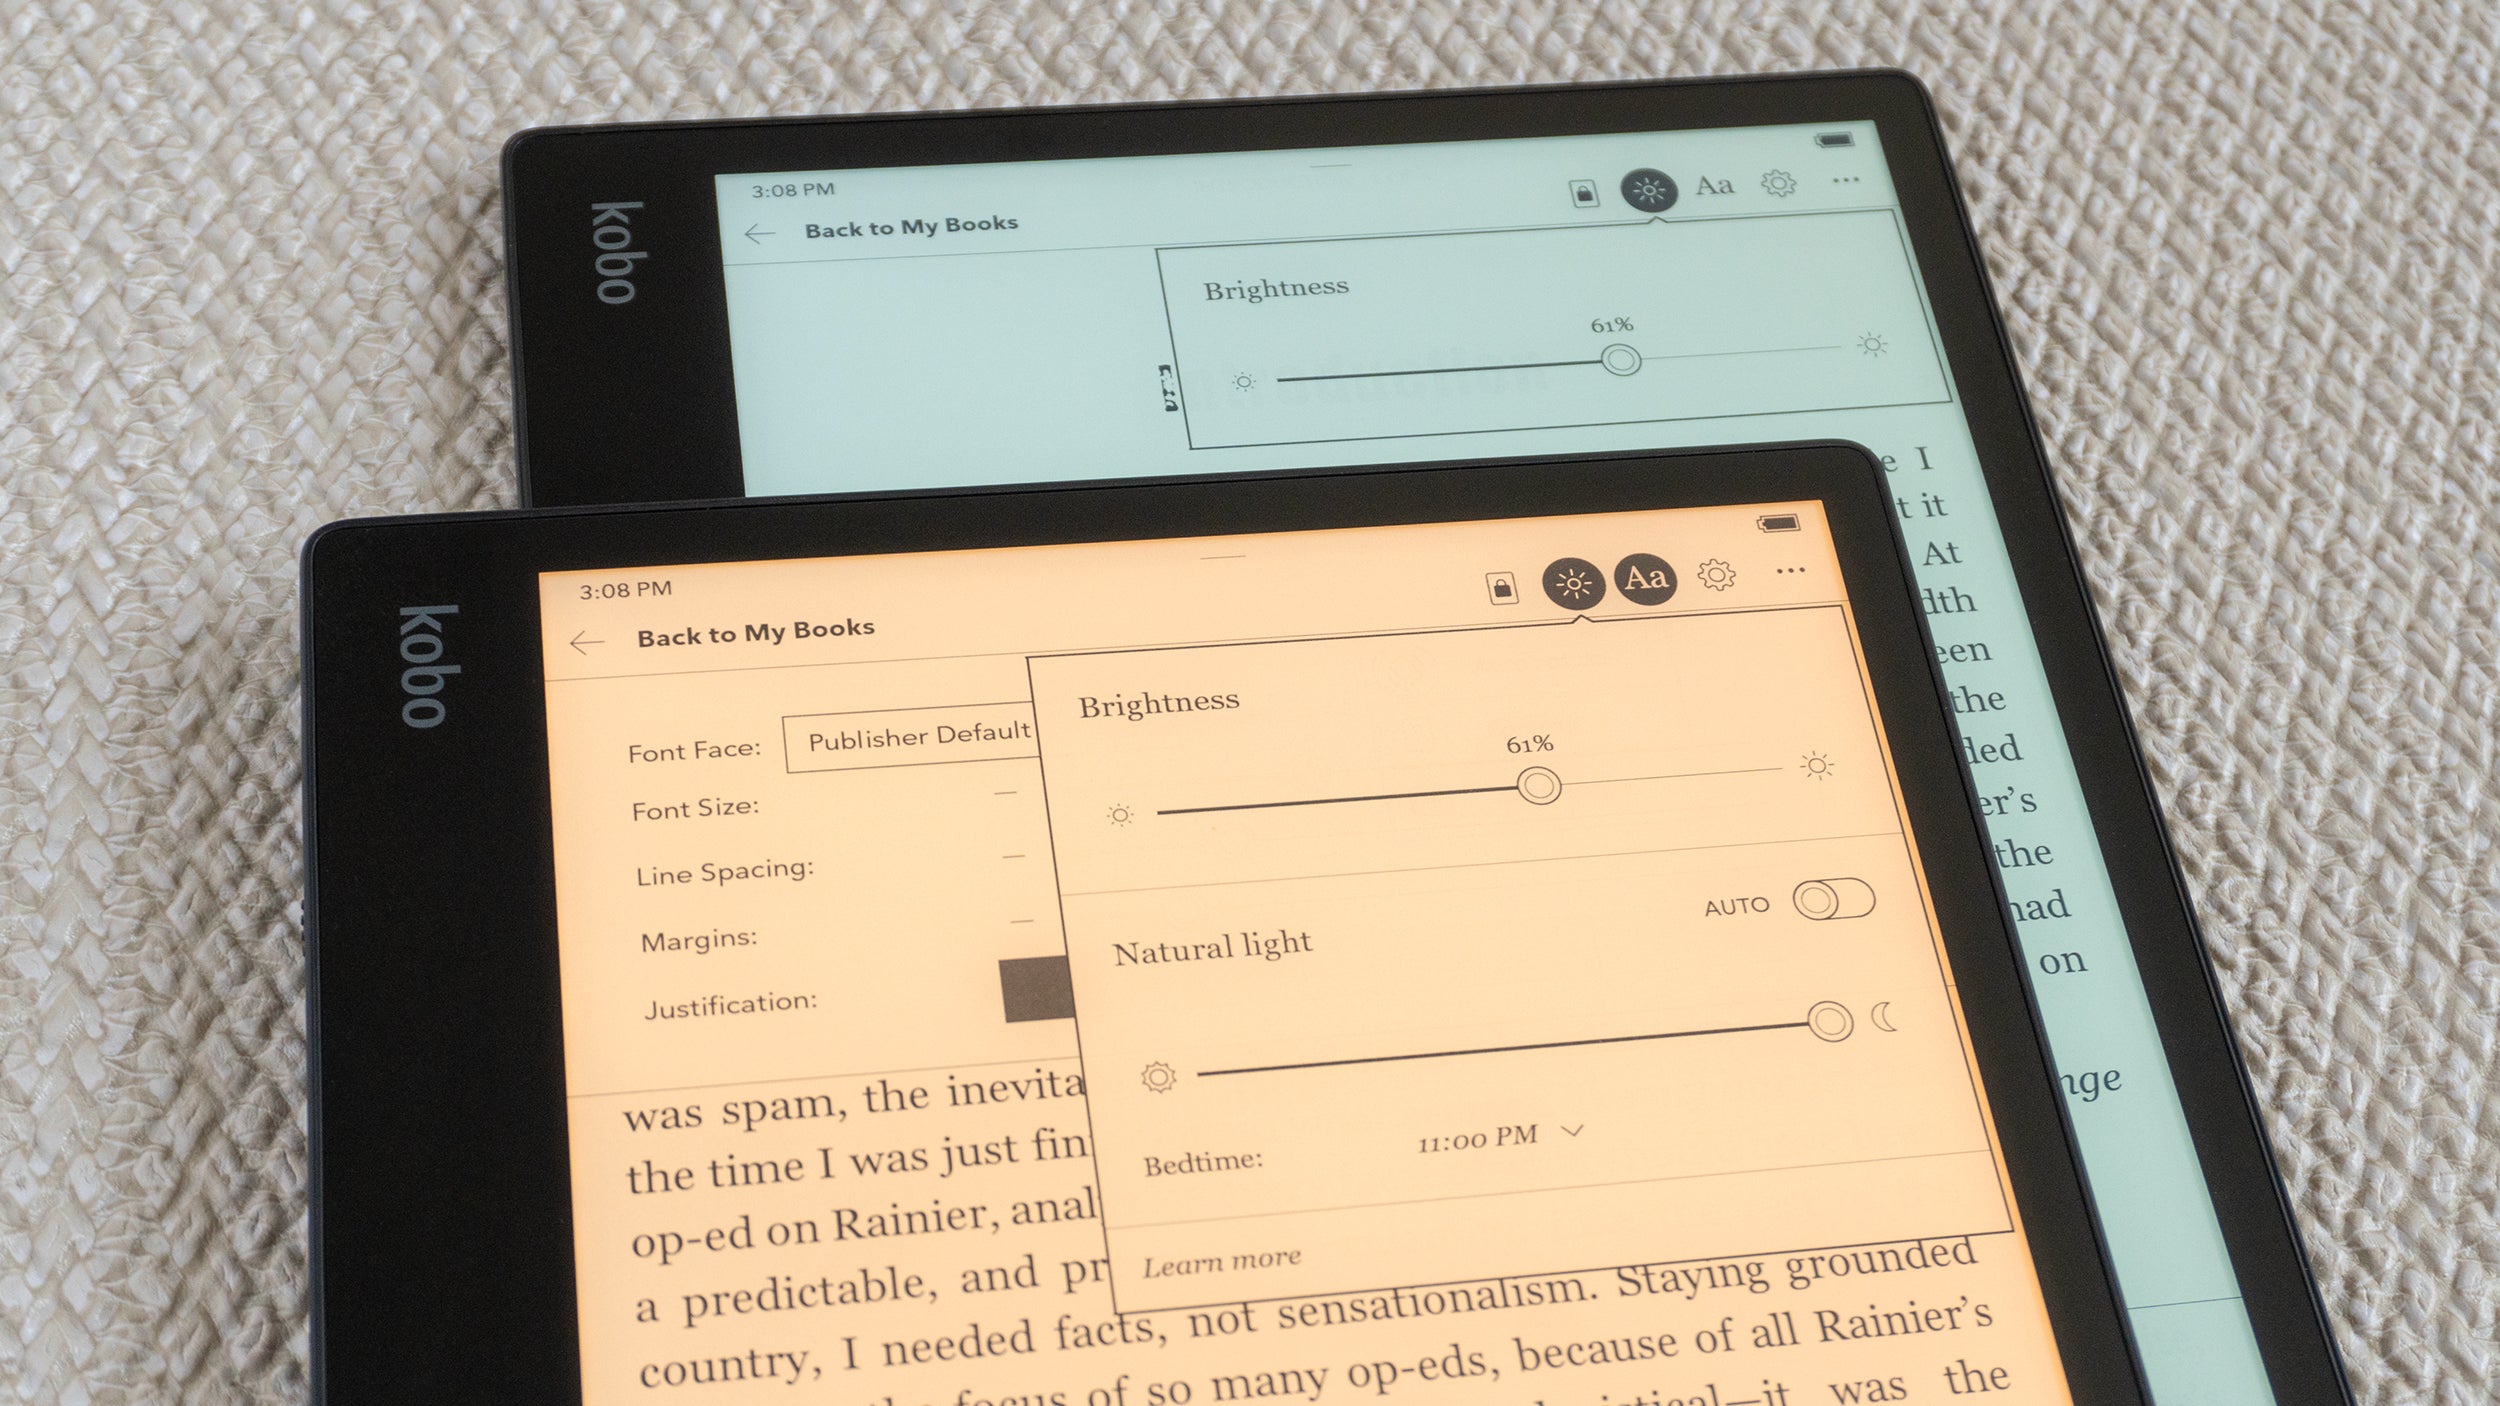 The Kobo Elipsa 2E (front) finally includes screen lighting with colour temperature adjustments. On the original Kobo Elipsa (back) you could only adjust the screen's brightness. (Photo: Andrew Liszewski | Gizmodo)